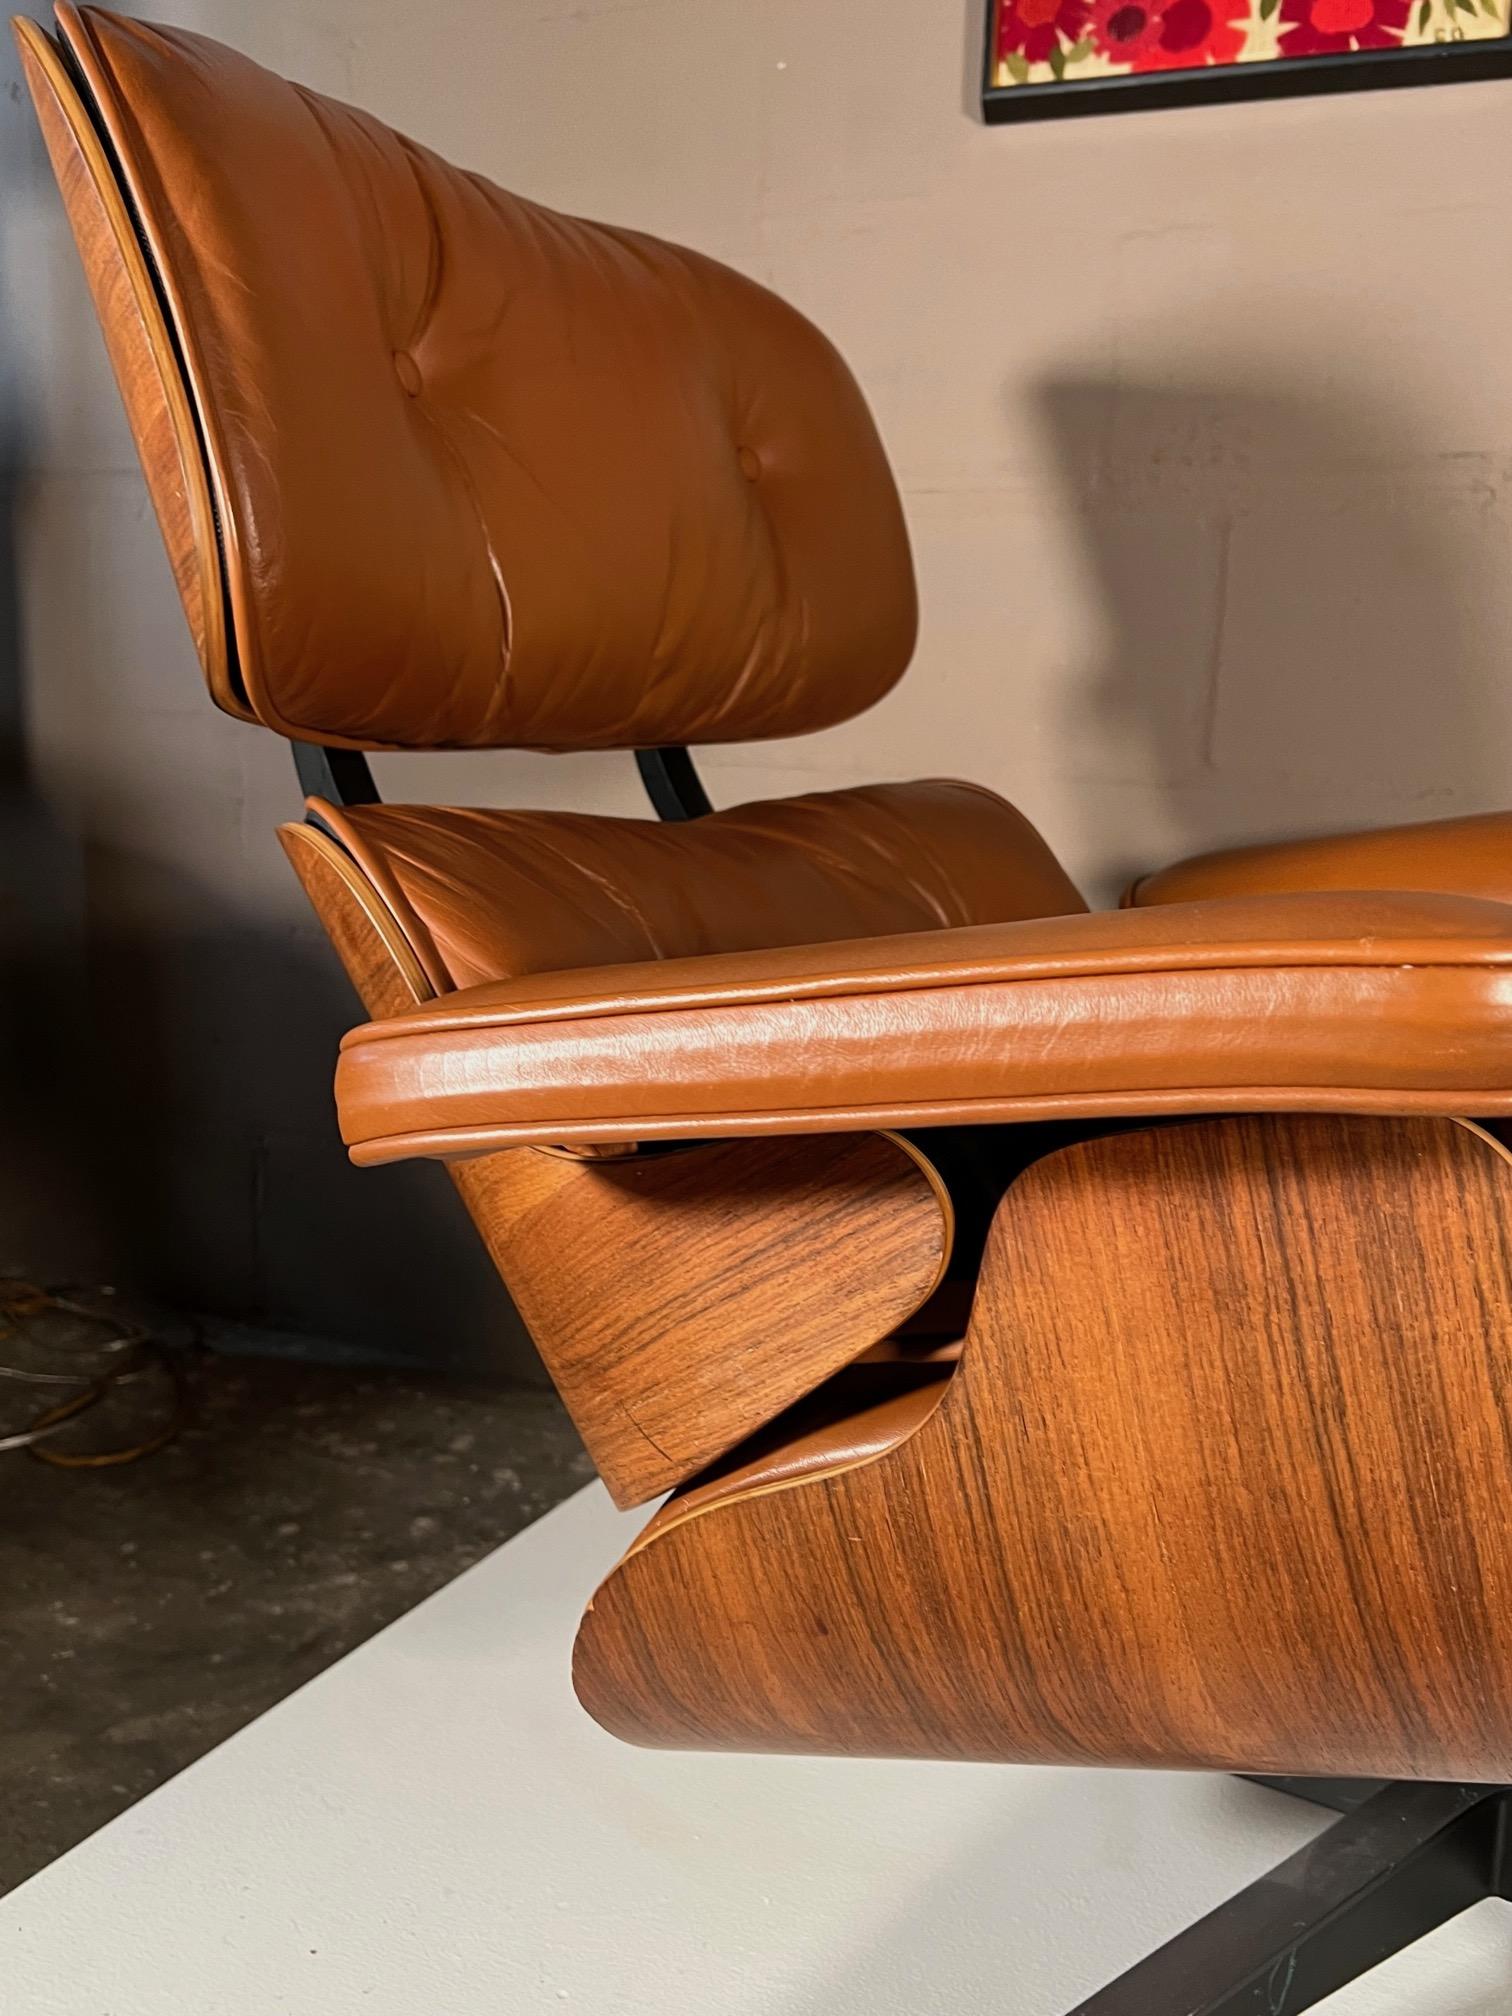 Mid-Century Modern Classic Charles Eames Herman Miller Lounge Chair 1980's Cognac Brown Leather